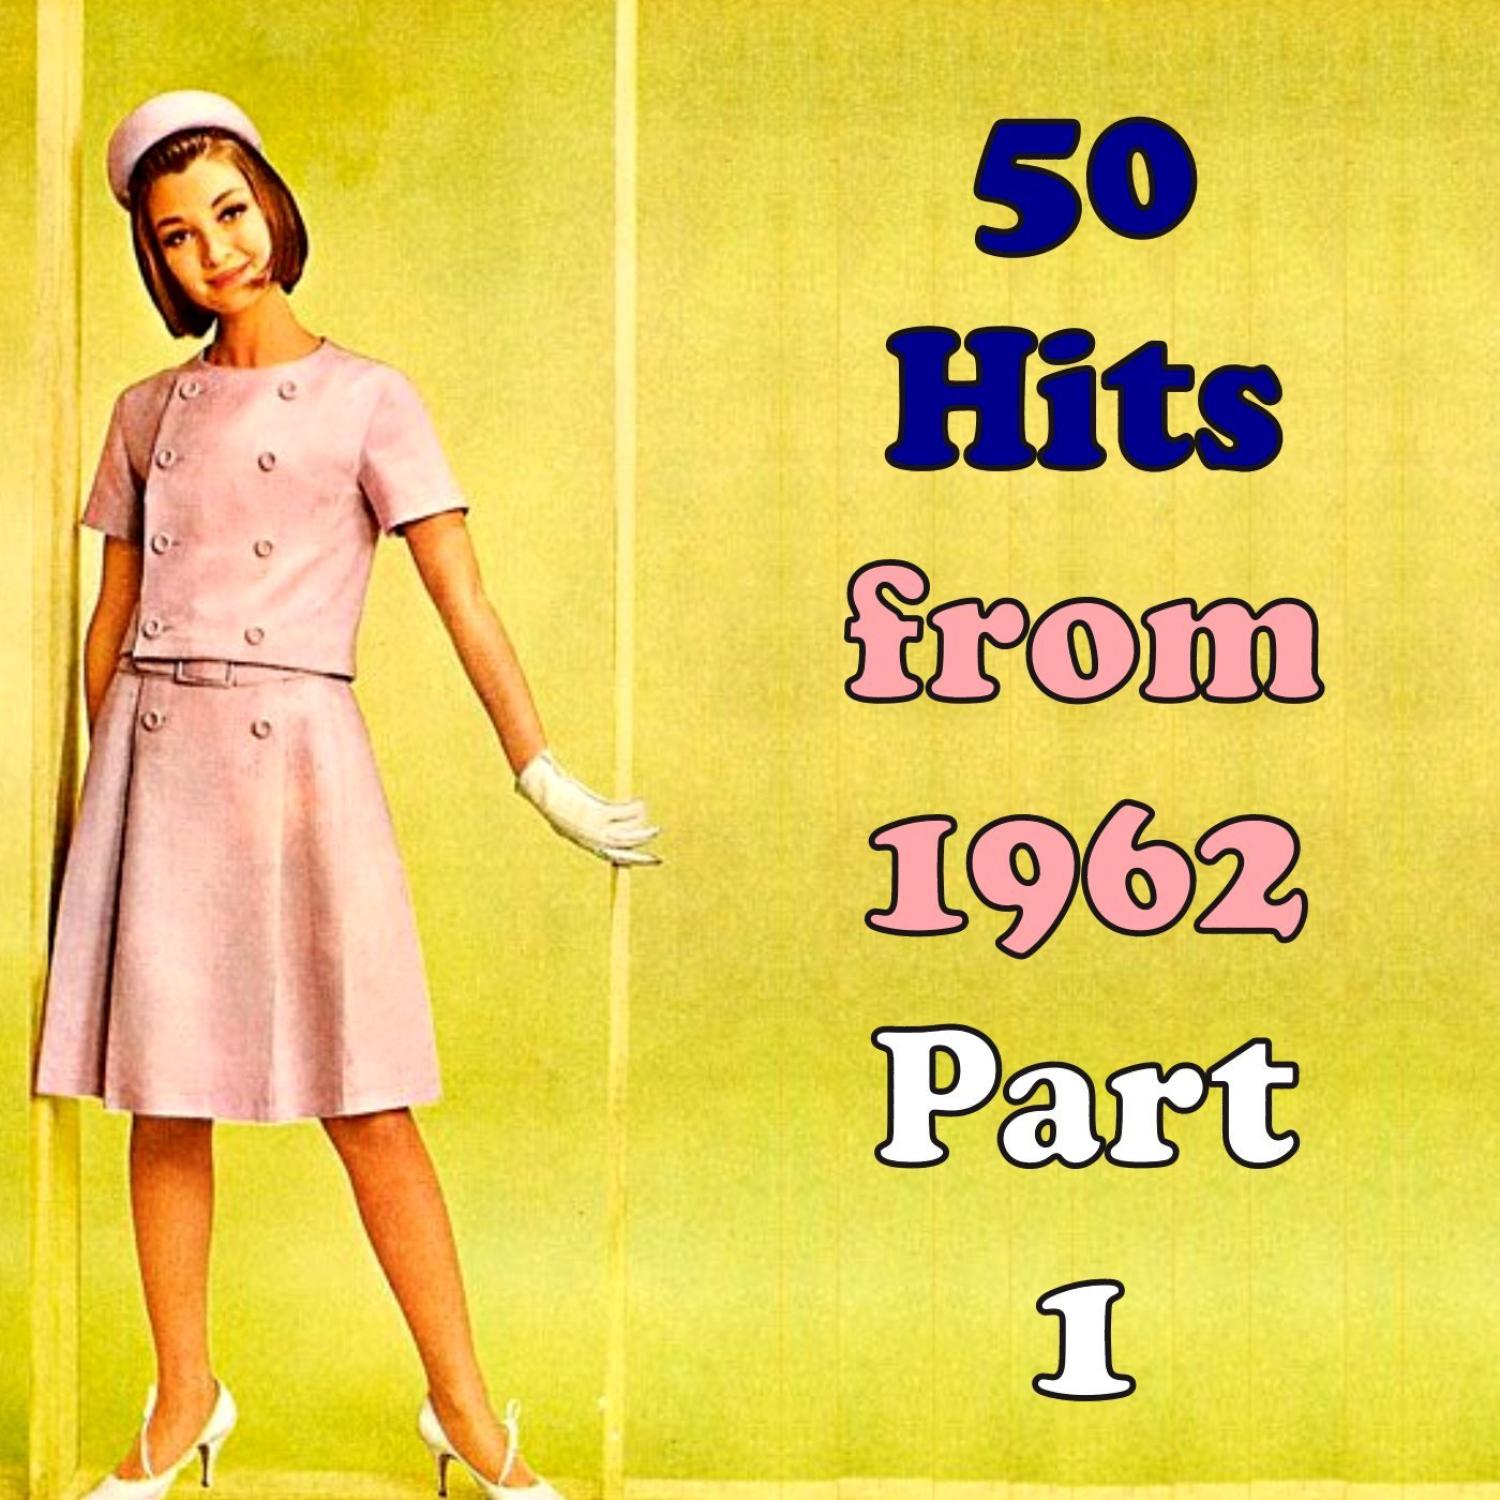 50 Hits from 1962, Part 1